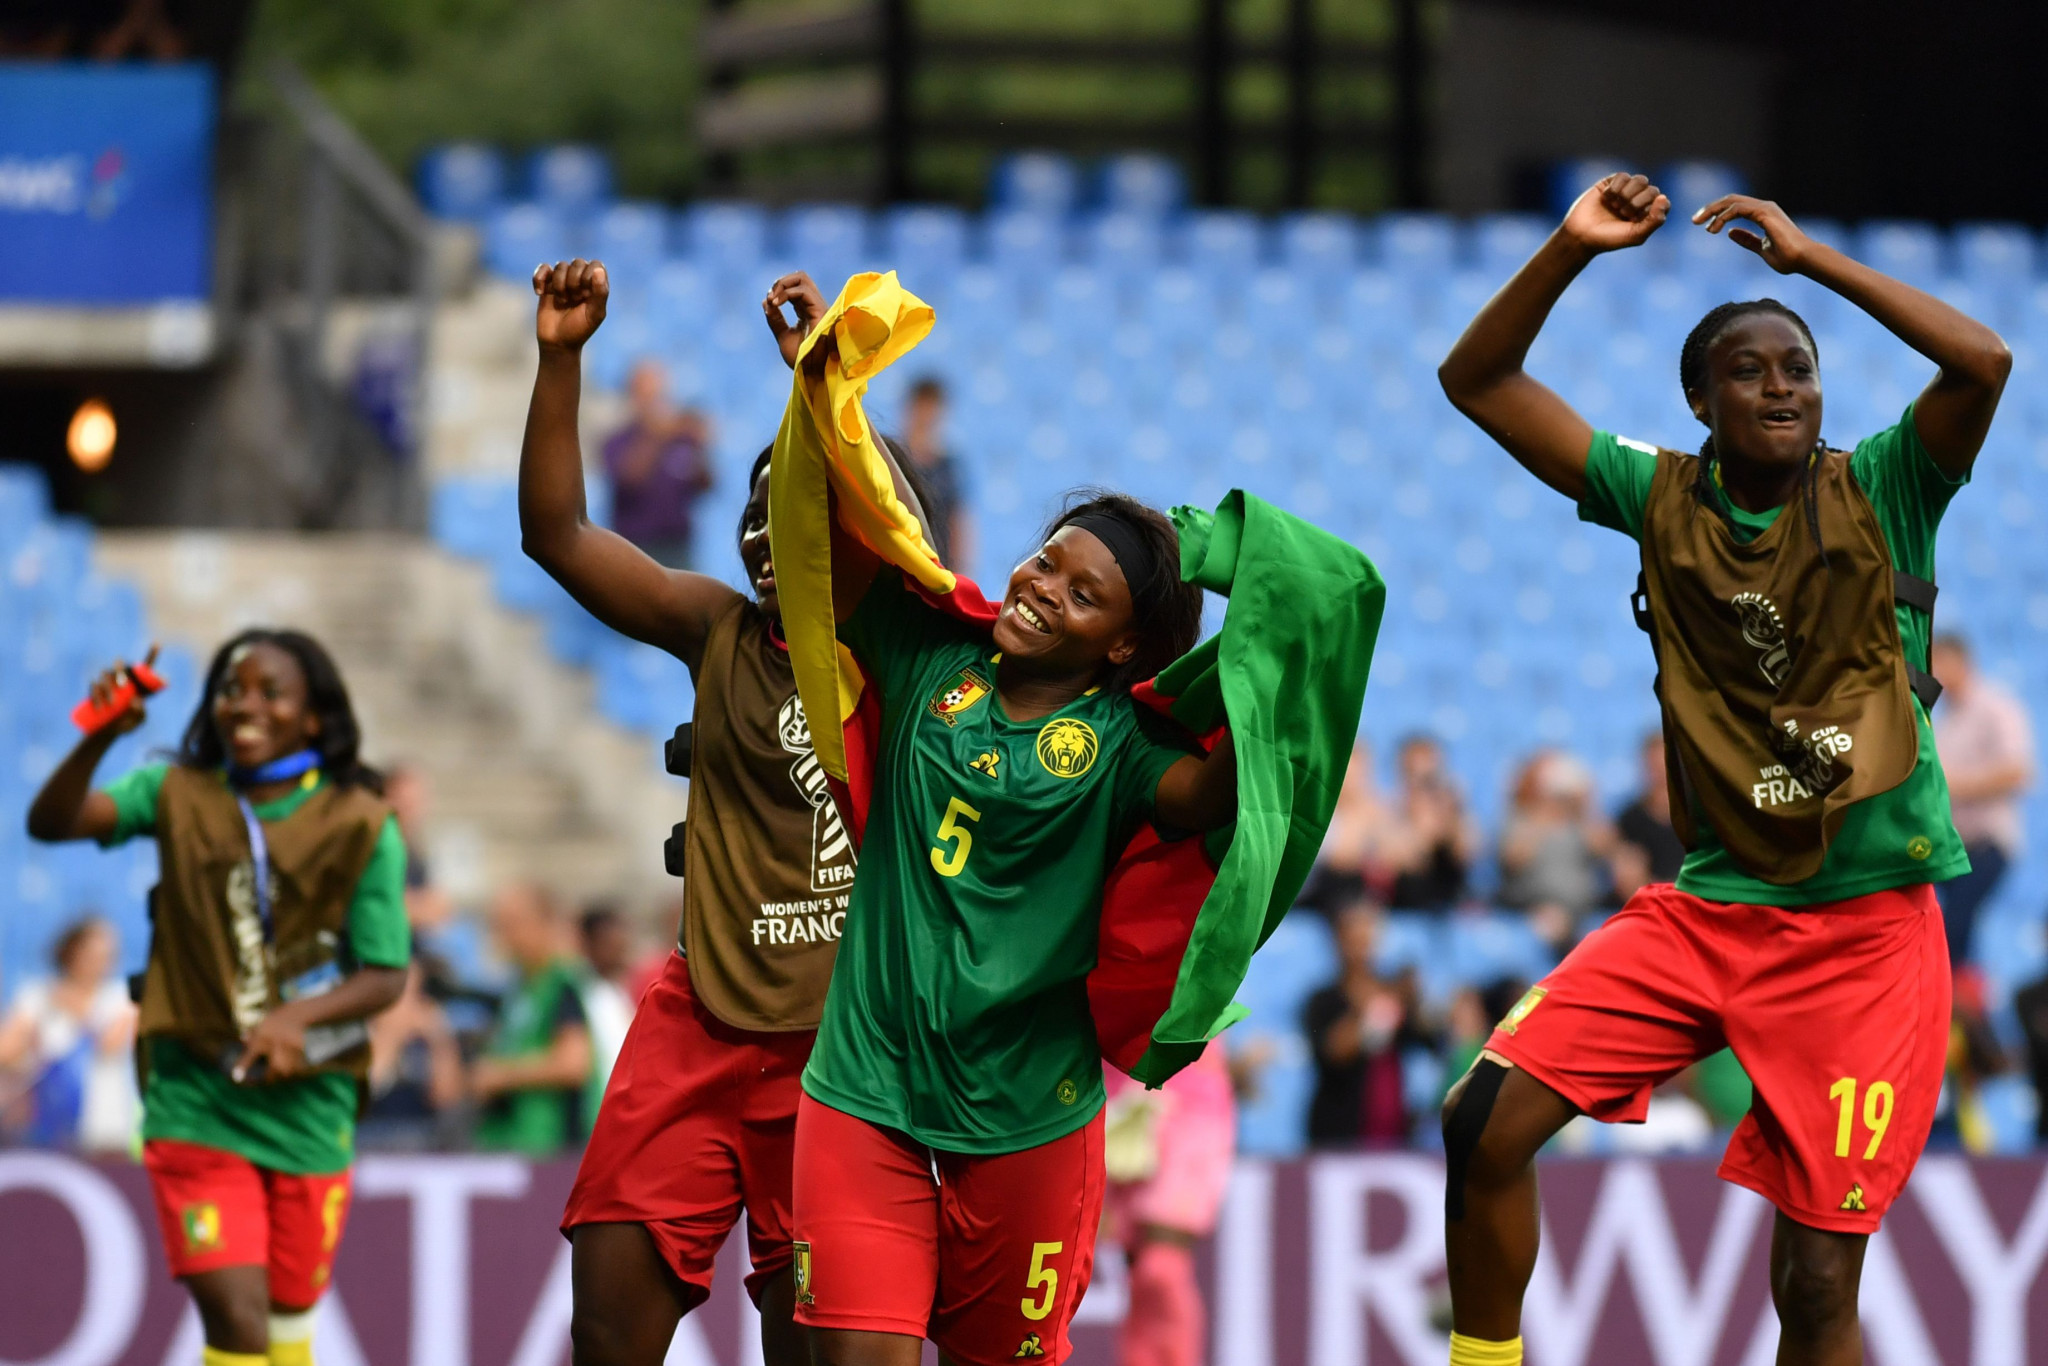 Cameroon celebrated their victory at the final whistle ©Getty Images